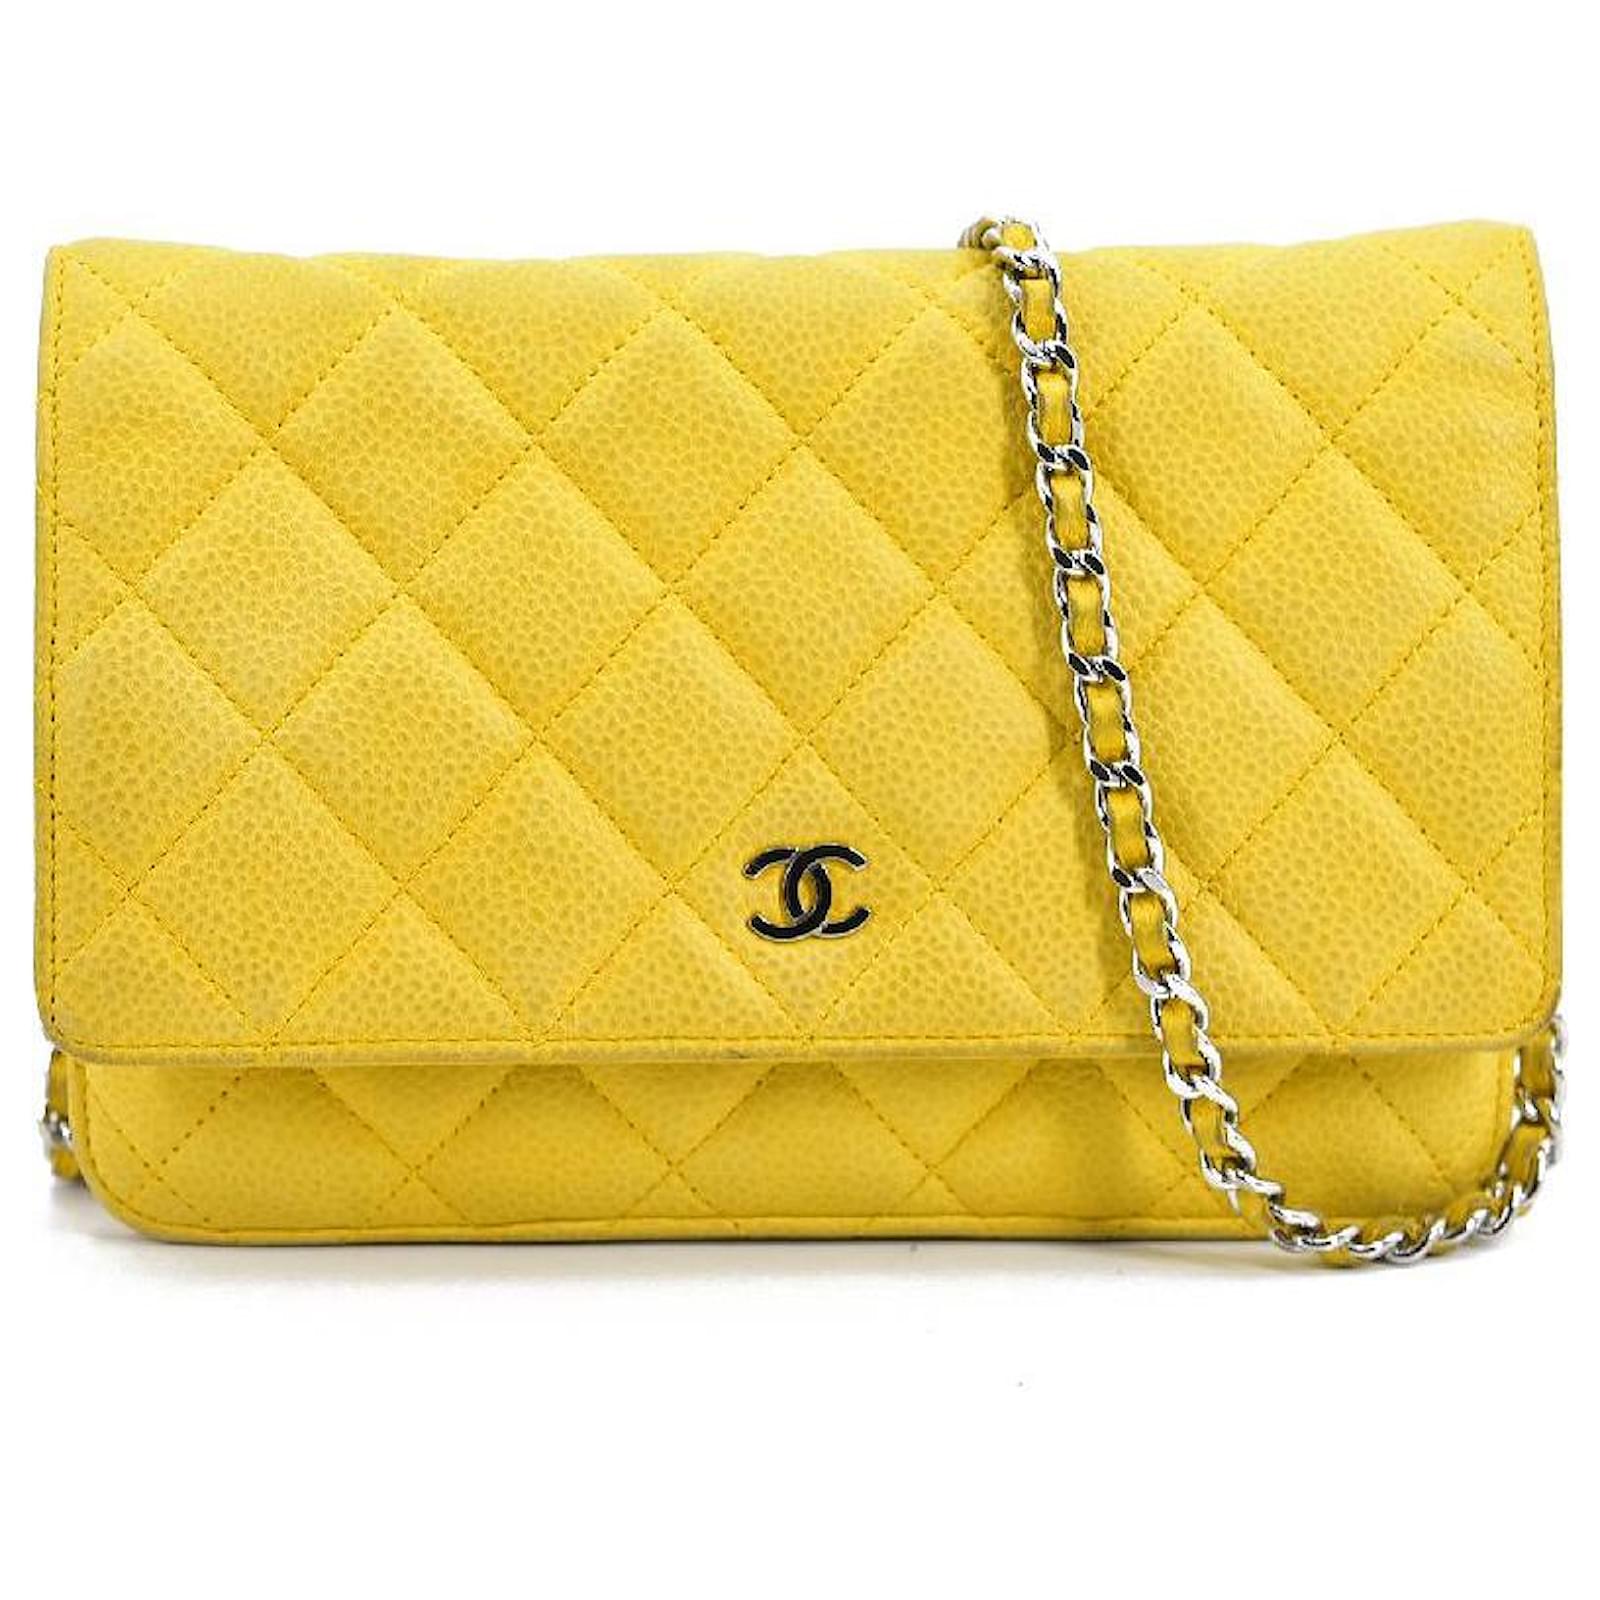 How to Authenticate Your Chanel Handbags  Luxity